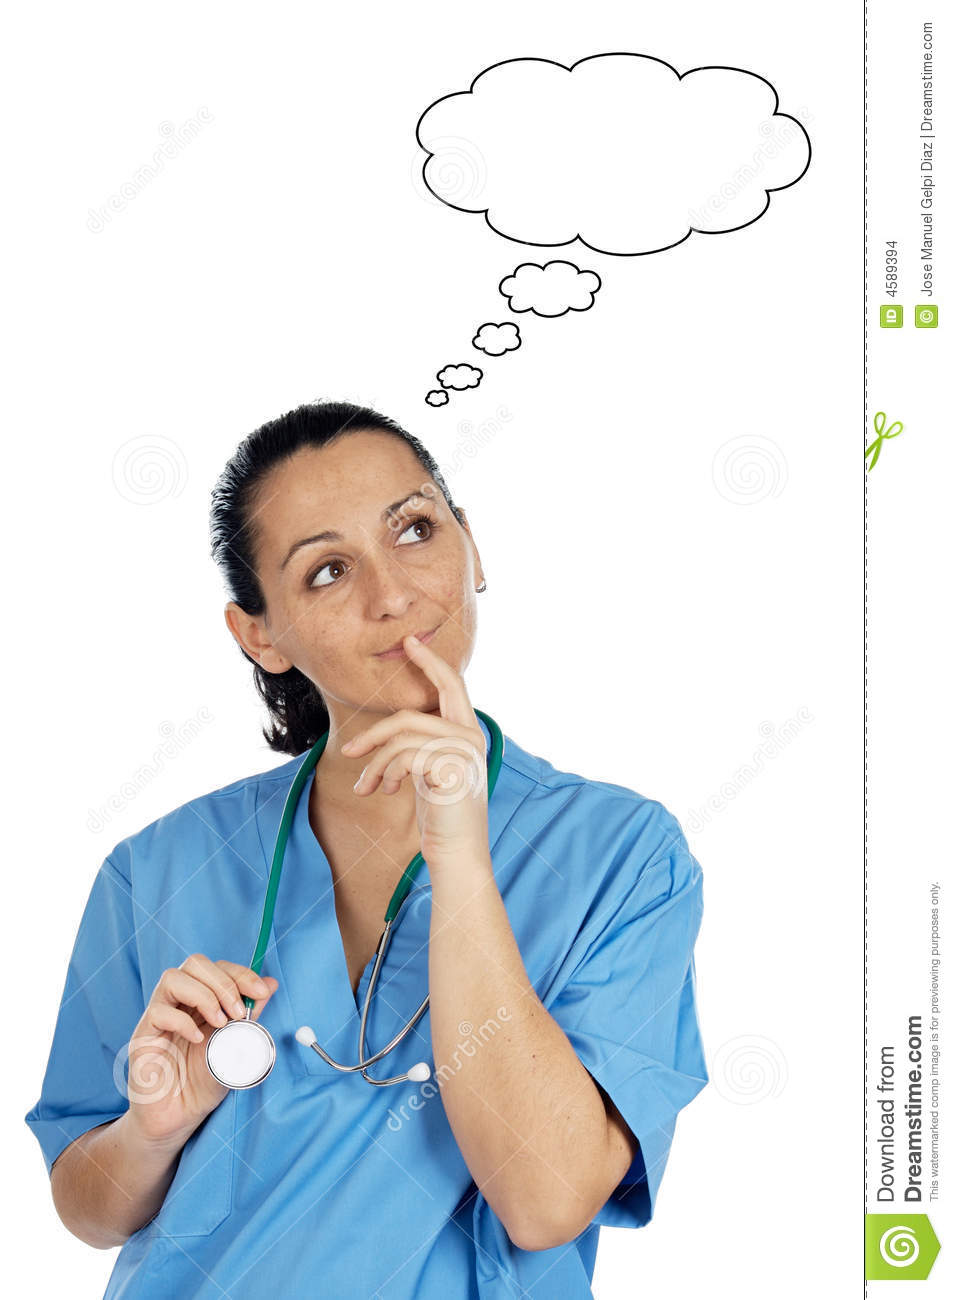 Lady Doctor Thinking Stock Images.